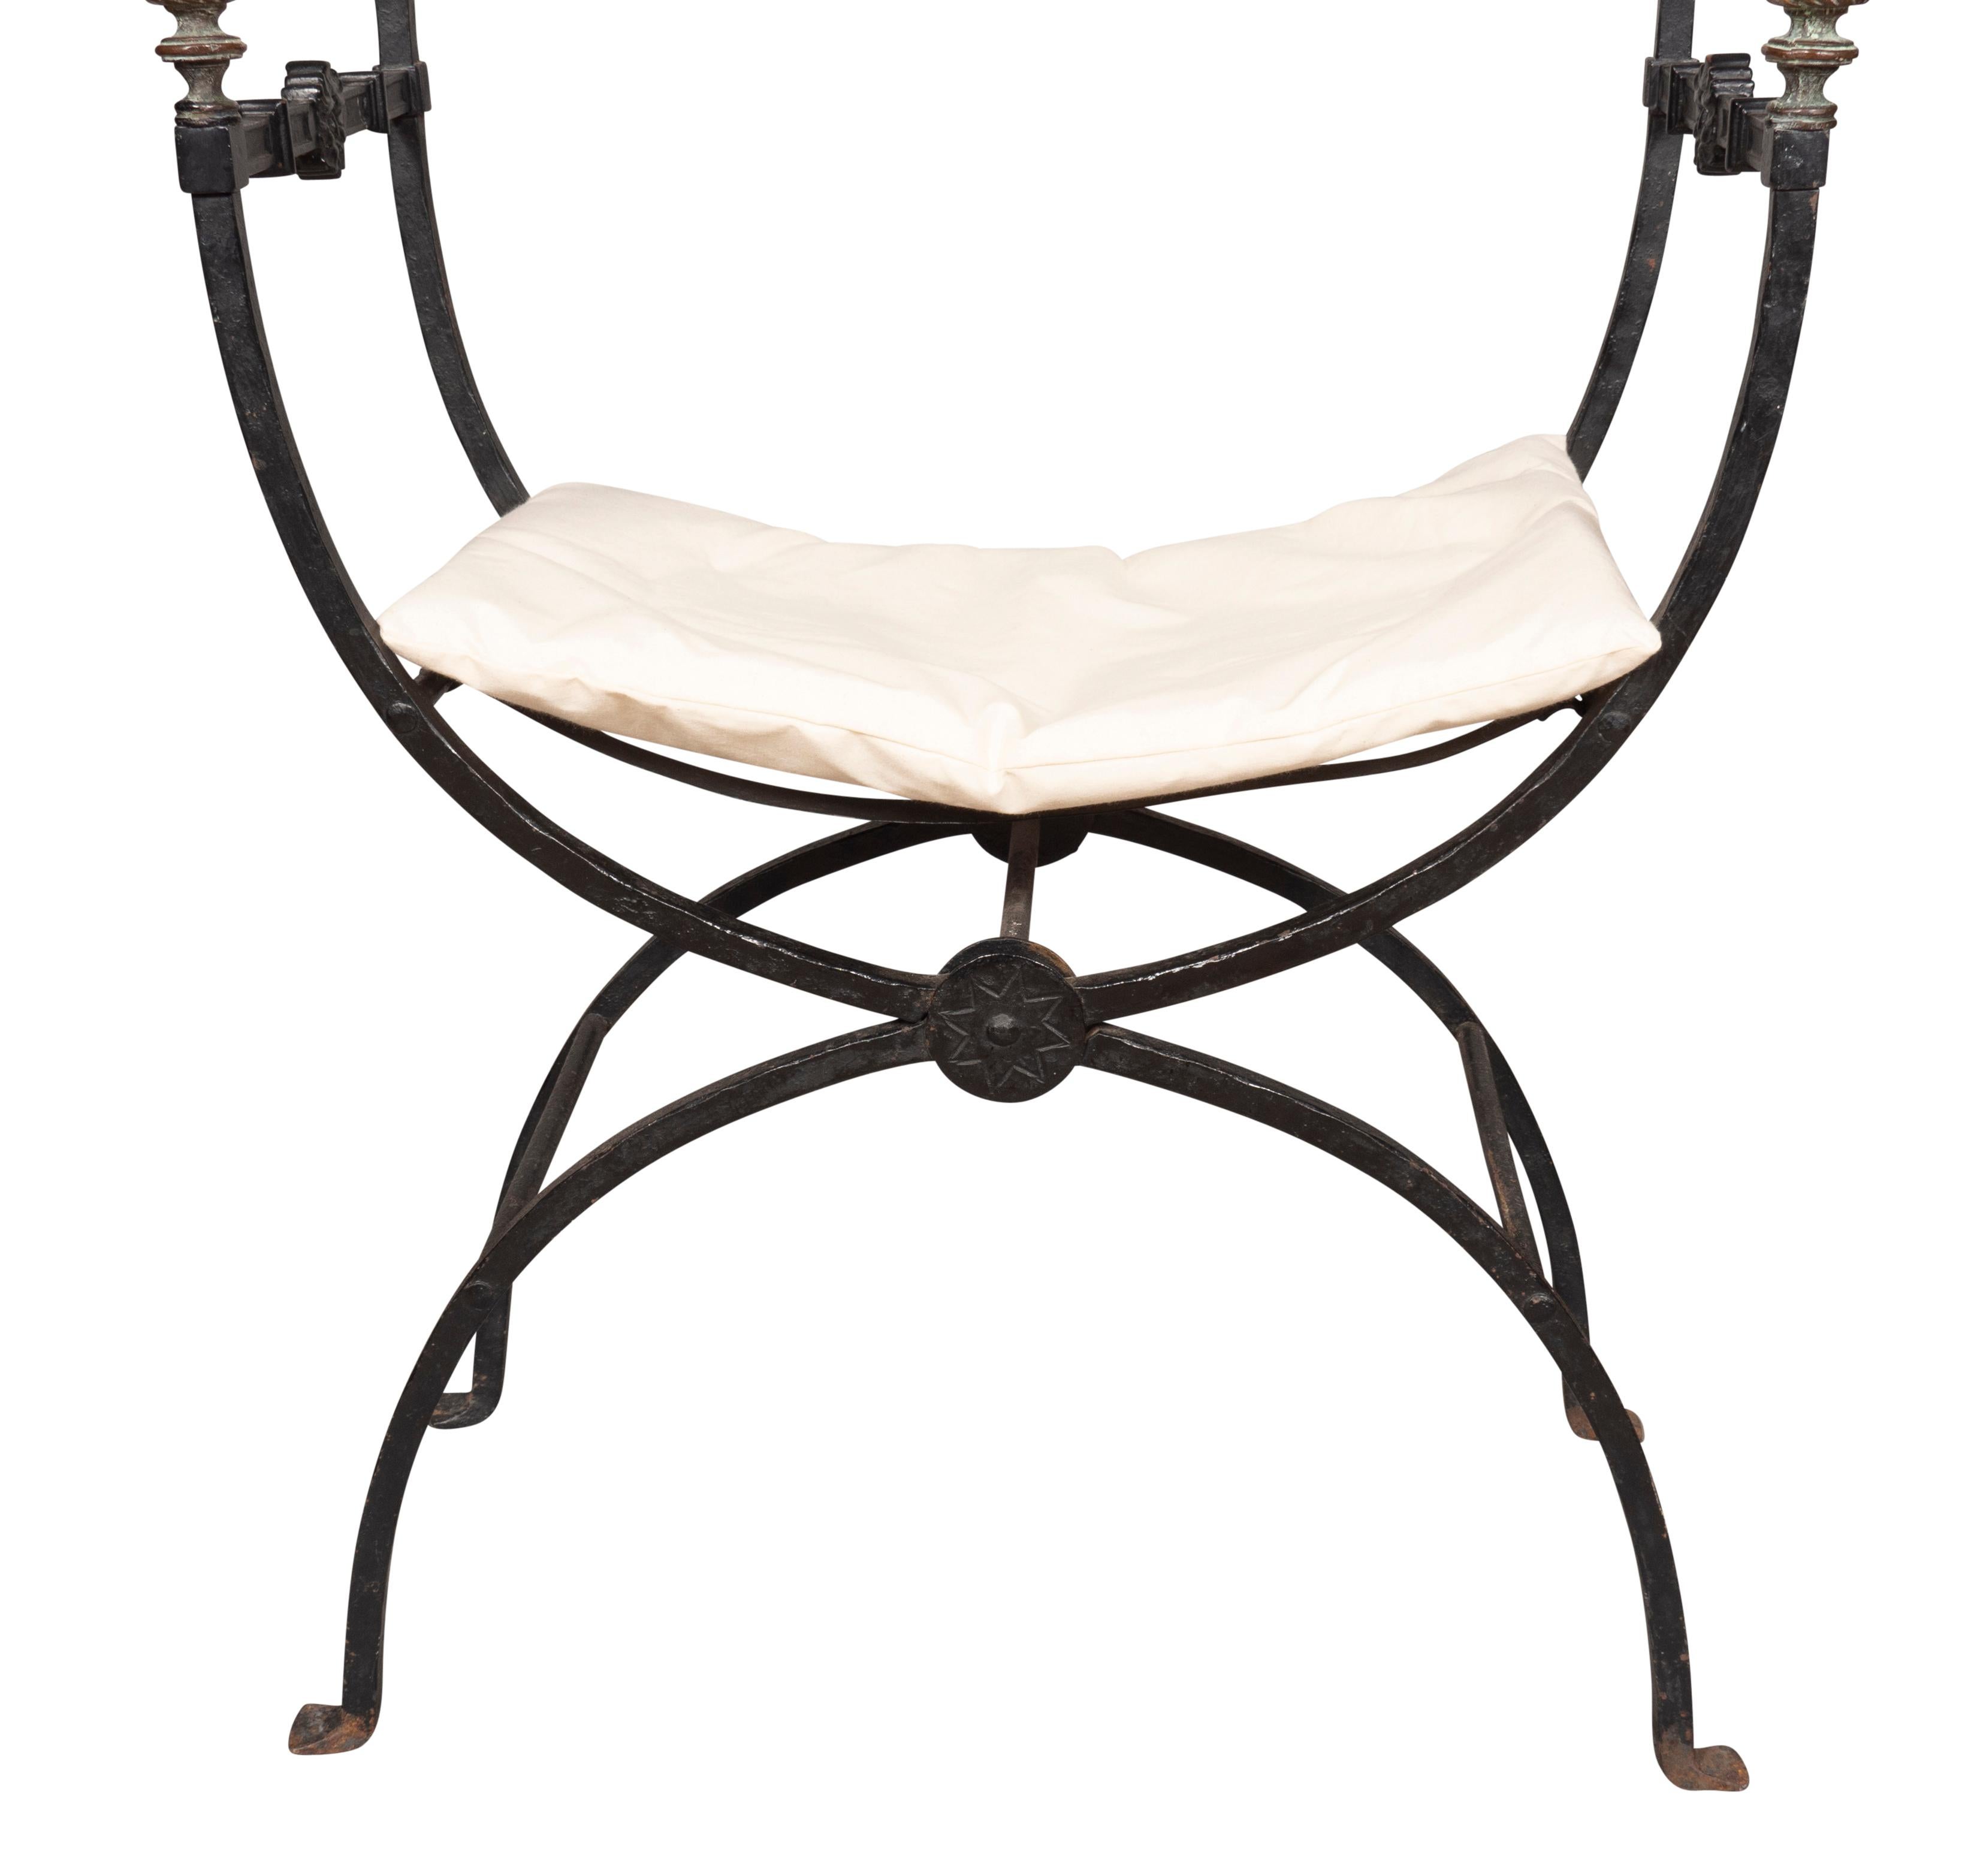 Renaissance Style Bronze And Wrought Iron Armchair In Good Condition For Sale In Essex, MA